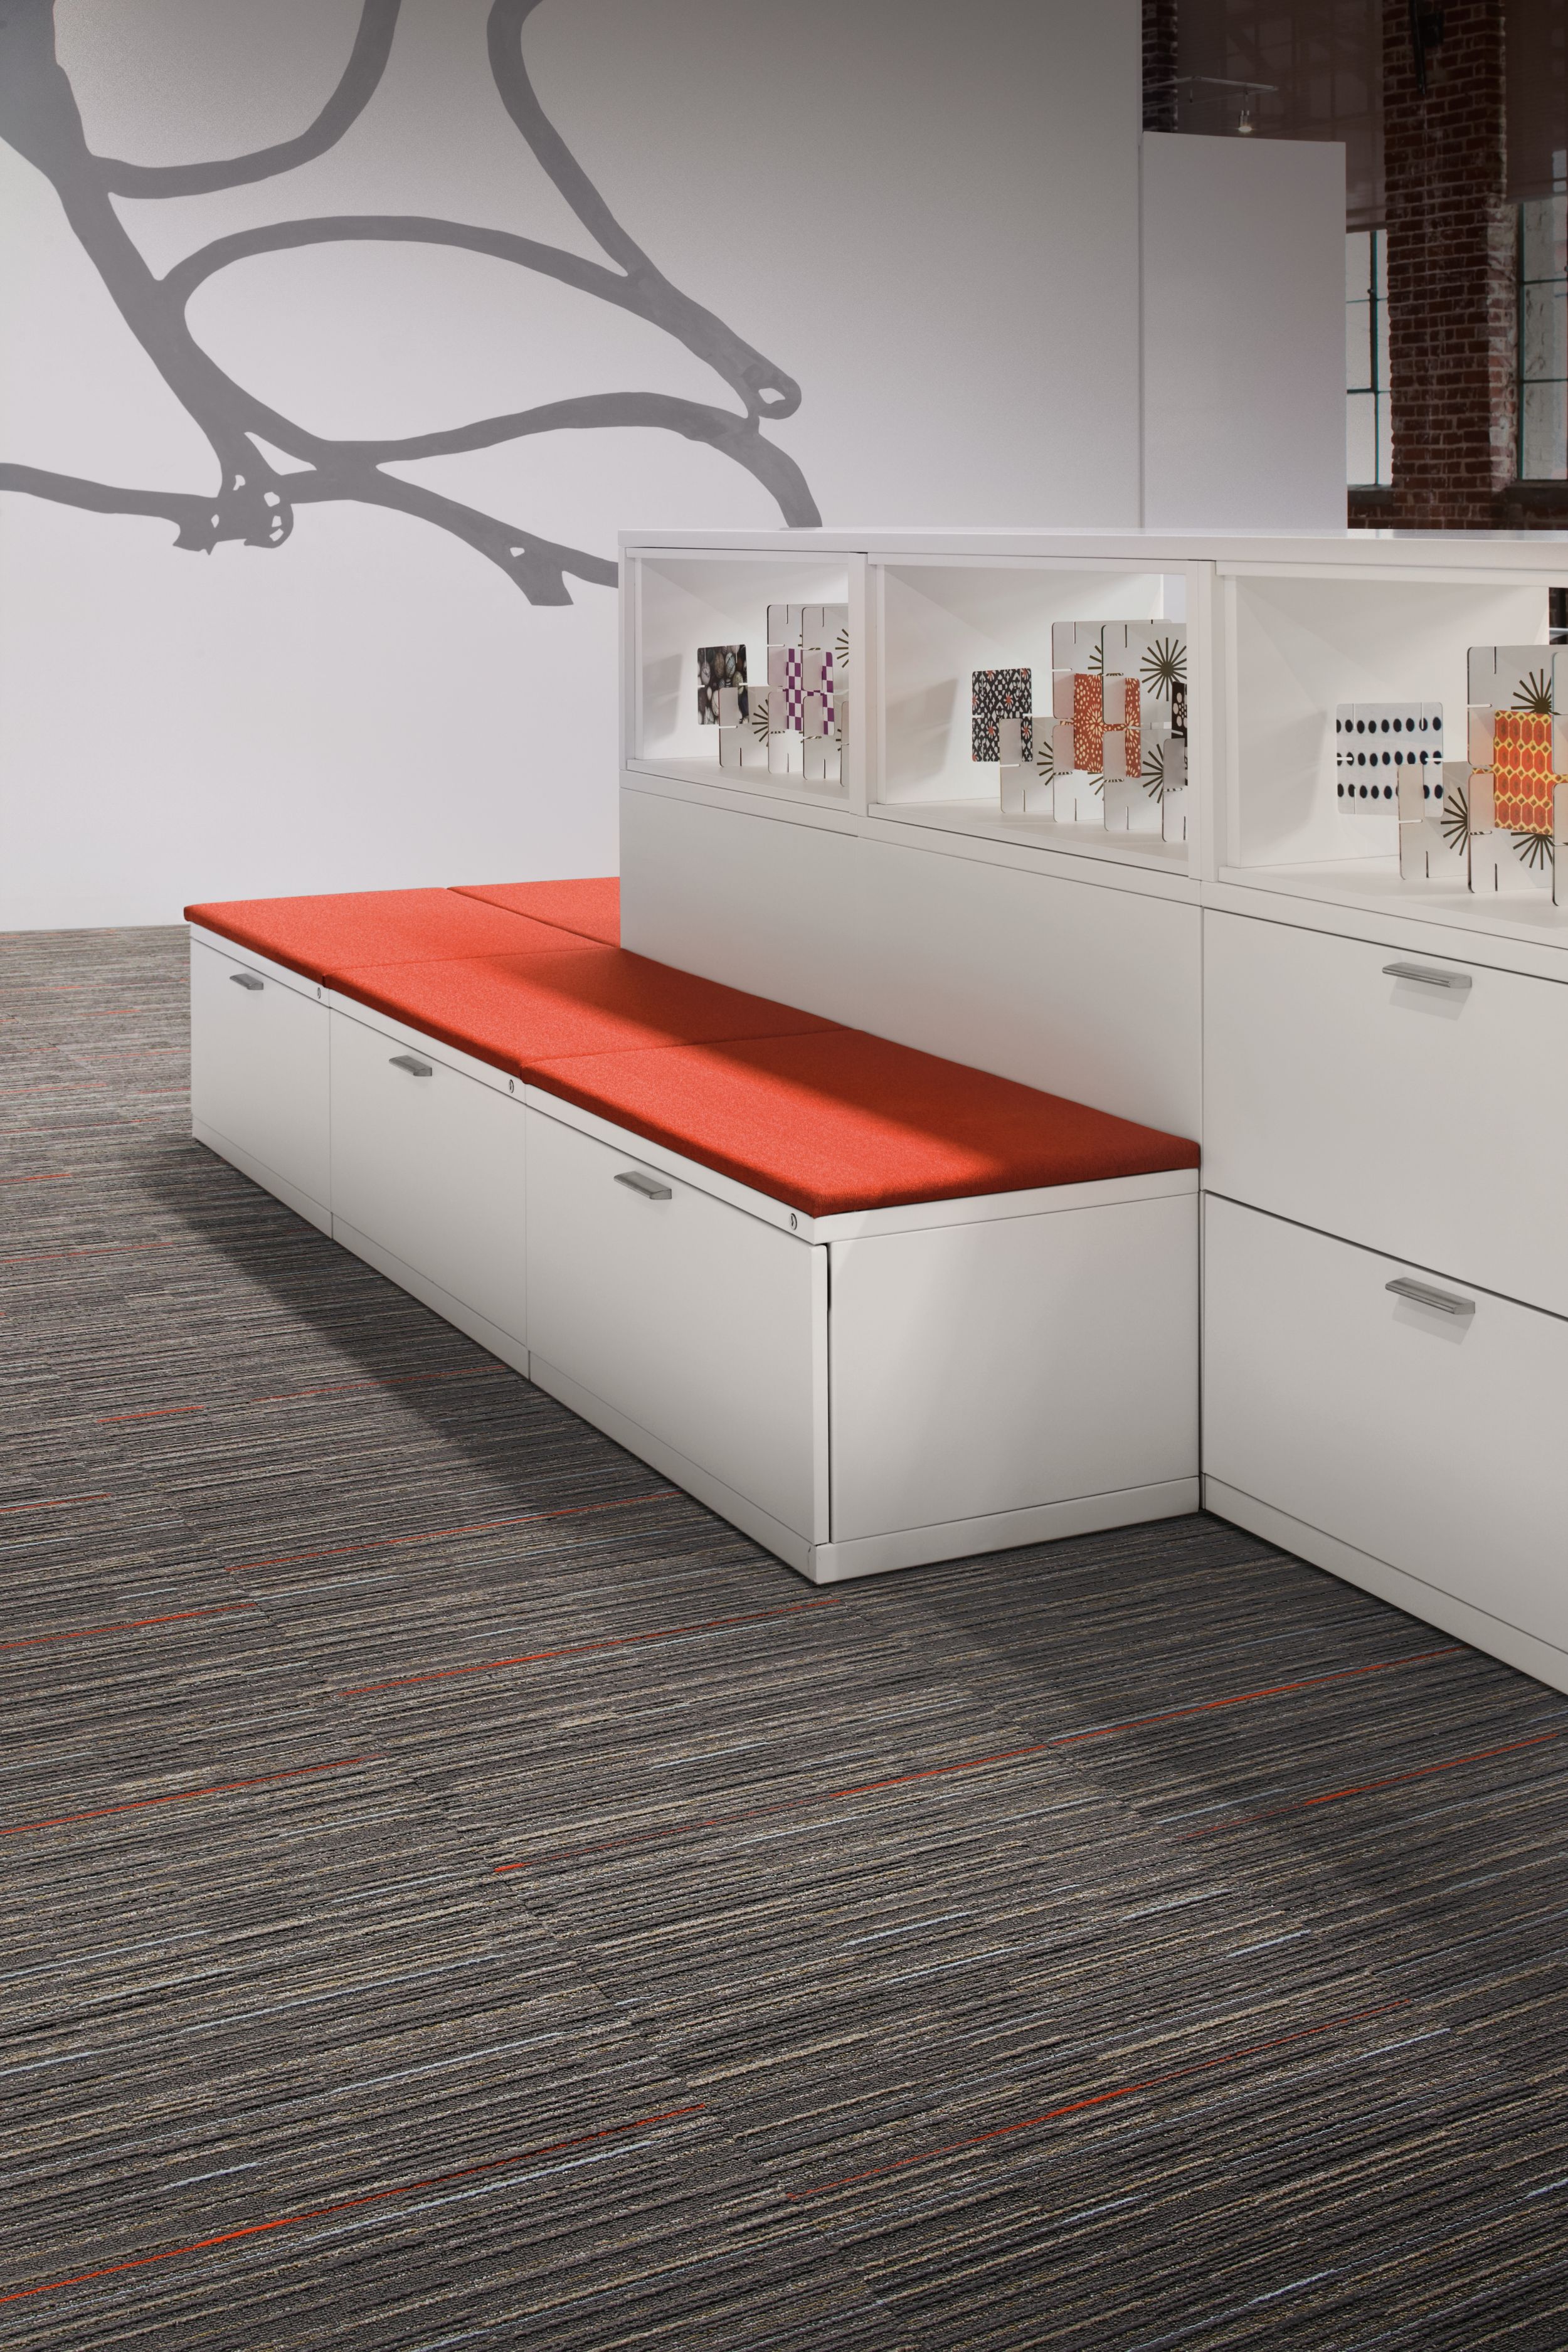 Interface Alliteration carpet tile in Mineral/Persimmon in office work area with filing cabinets imagen número 1